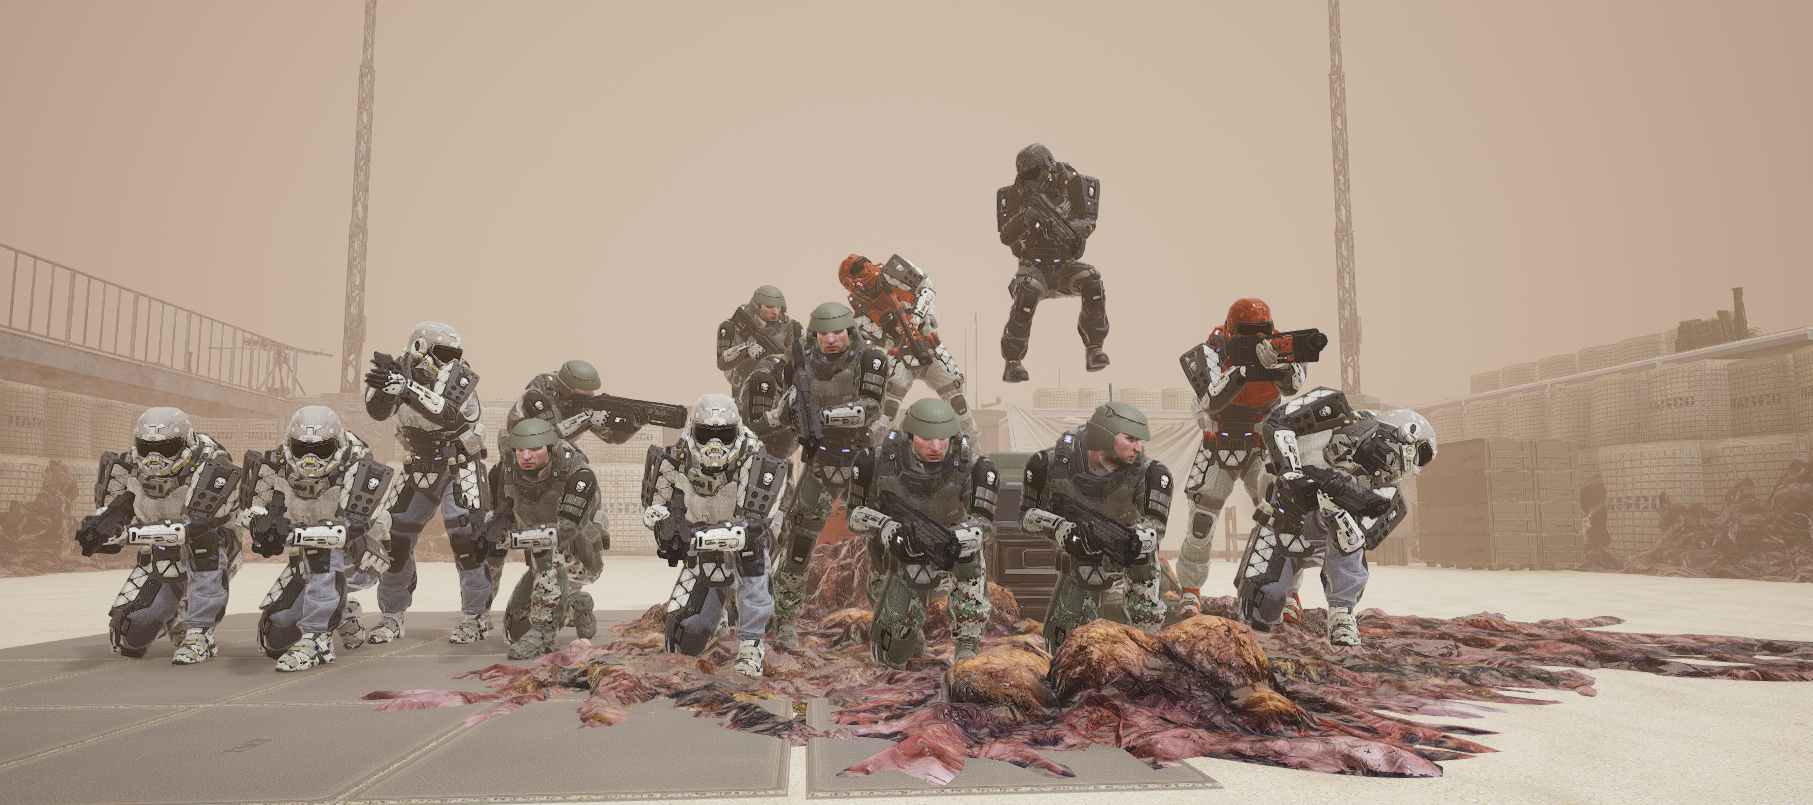 View the Mod DB Troopers Mod for Squad image unknown 9. troopers mod for sq...